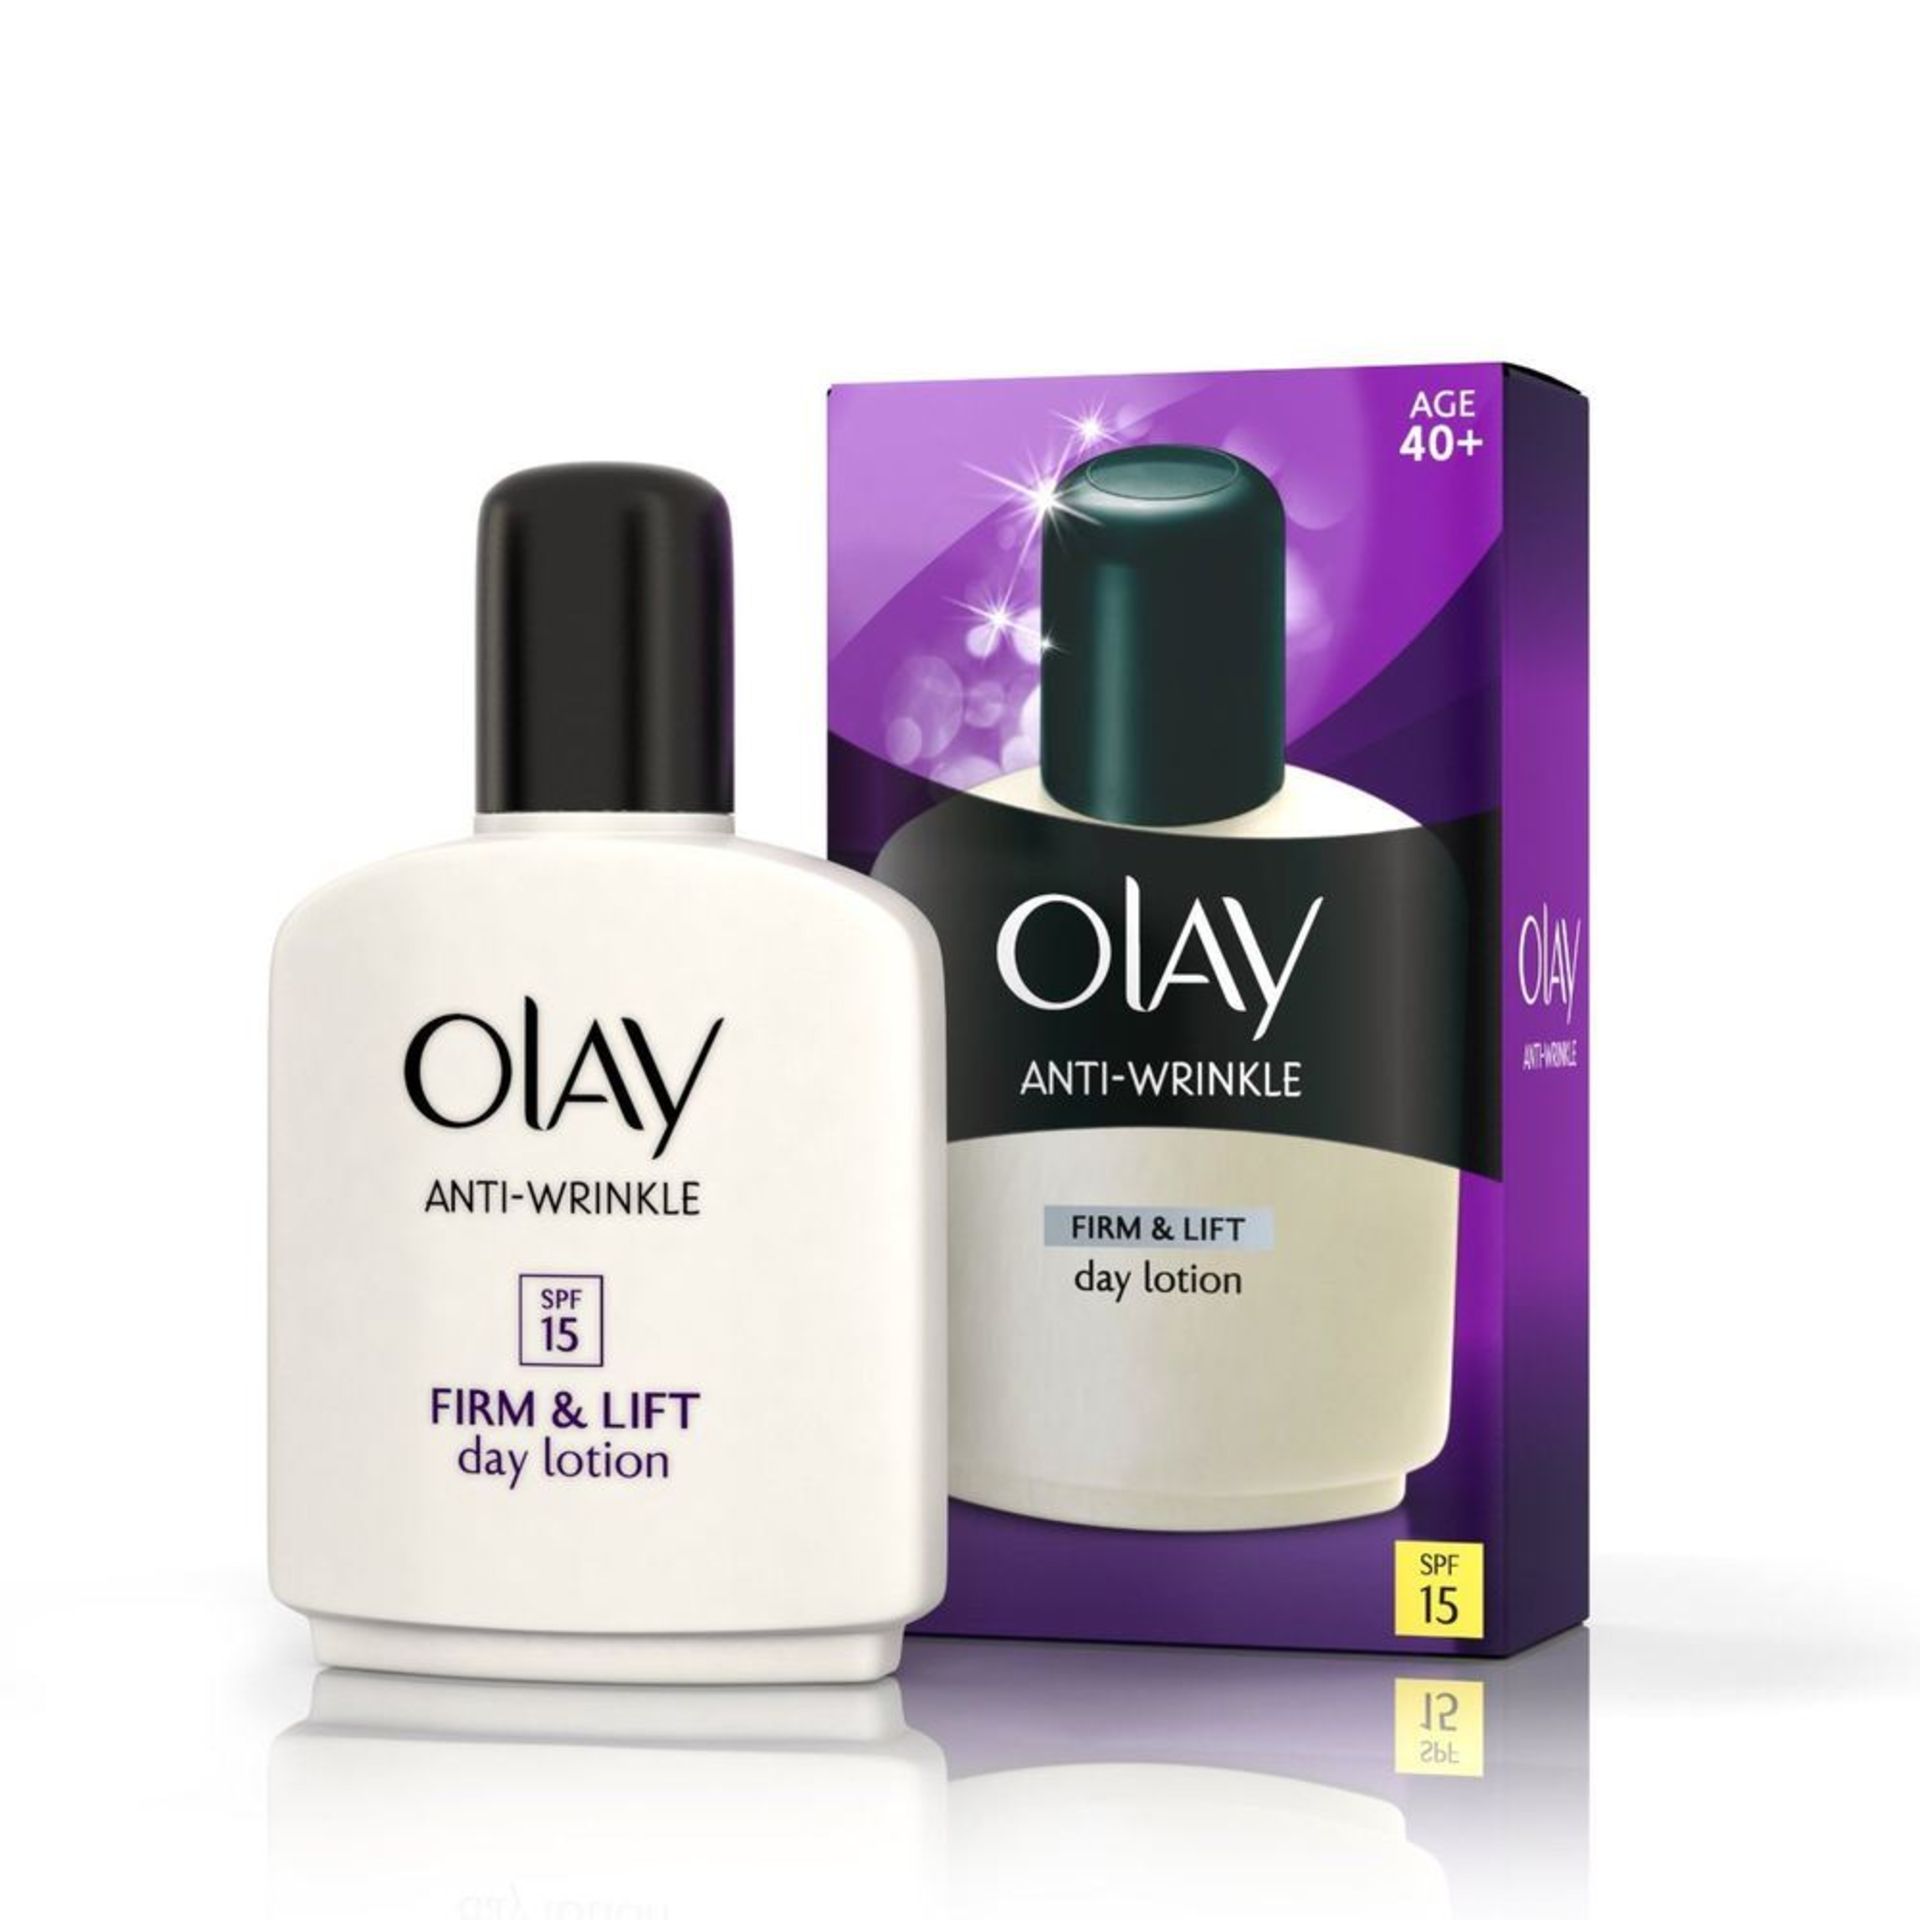 V Brand New Olay Anti-Wrinkle Firm & Lift Day Lotion 100 ml/SPF15/40+